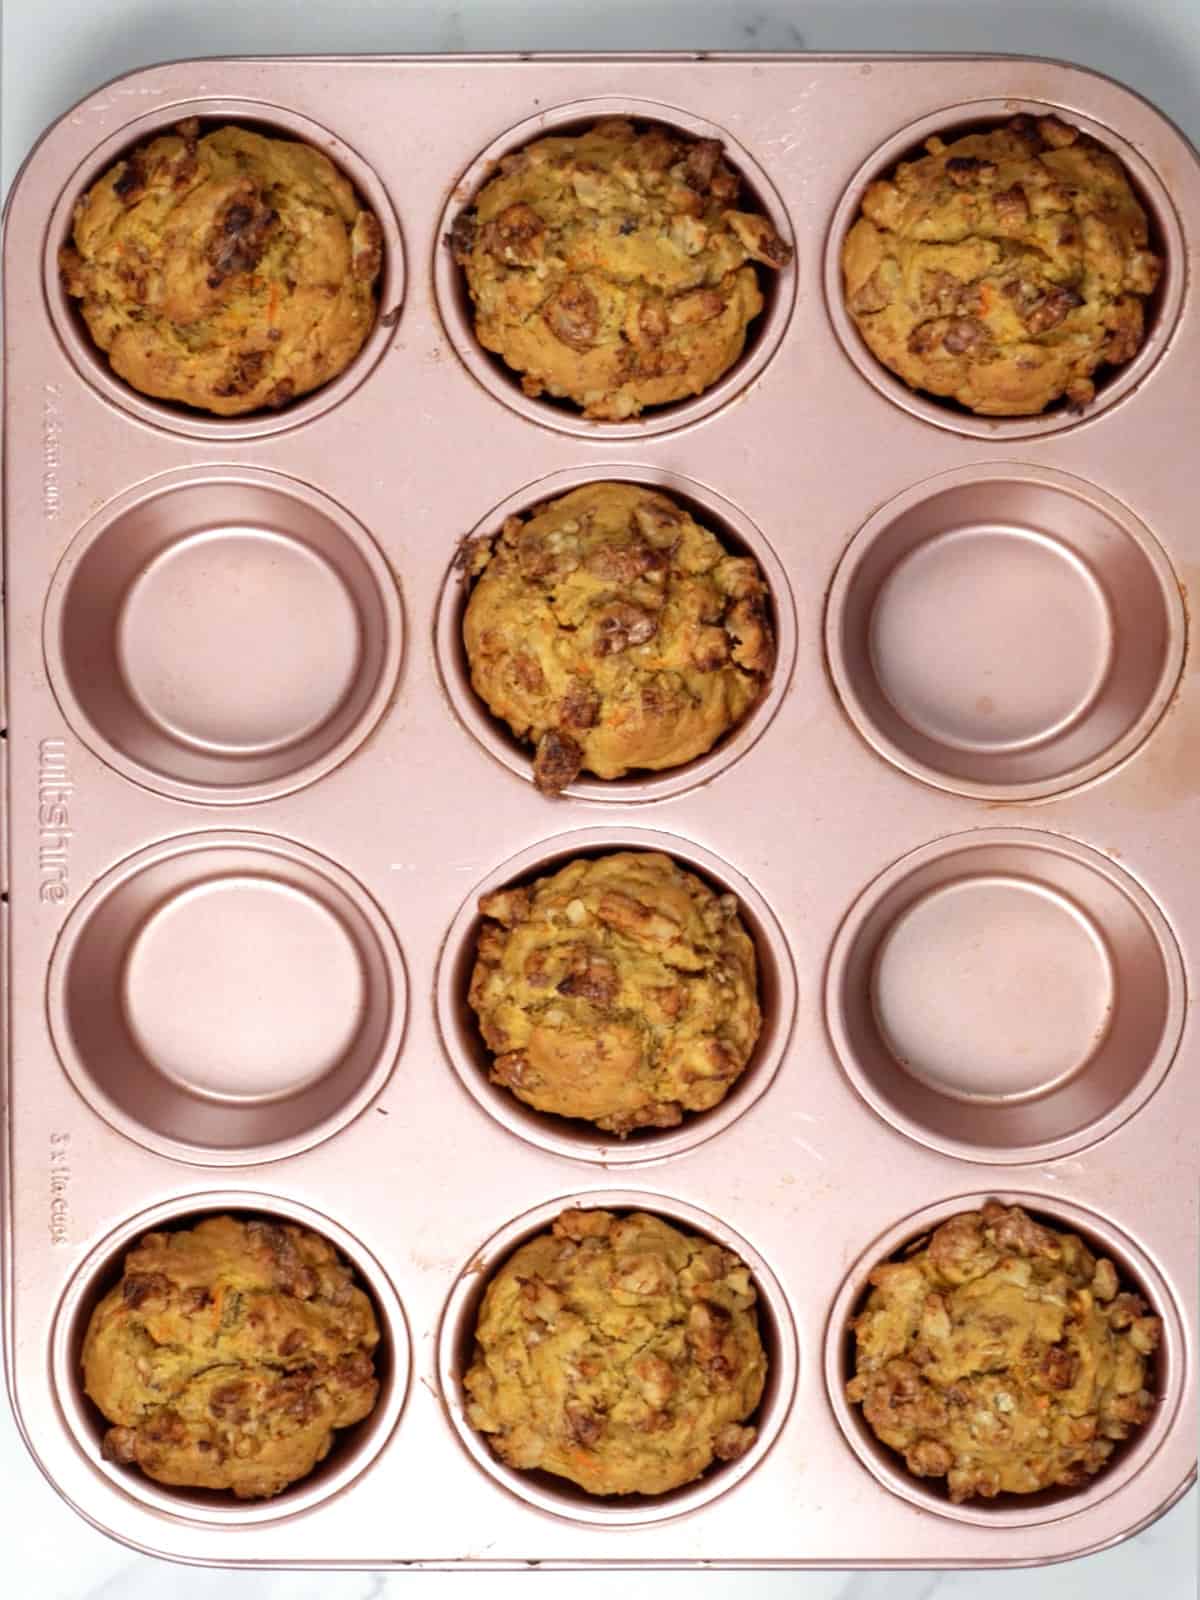 8 baked golden muffins topped with chopped walnuts in a pink muffin tray